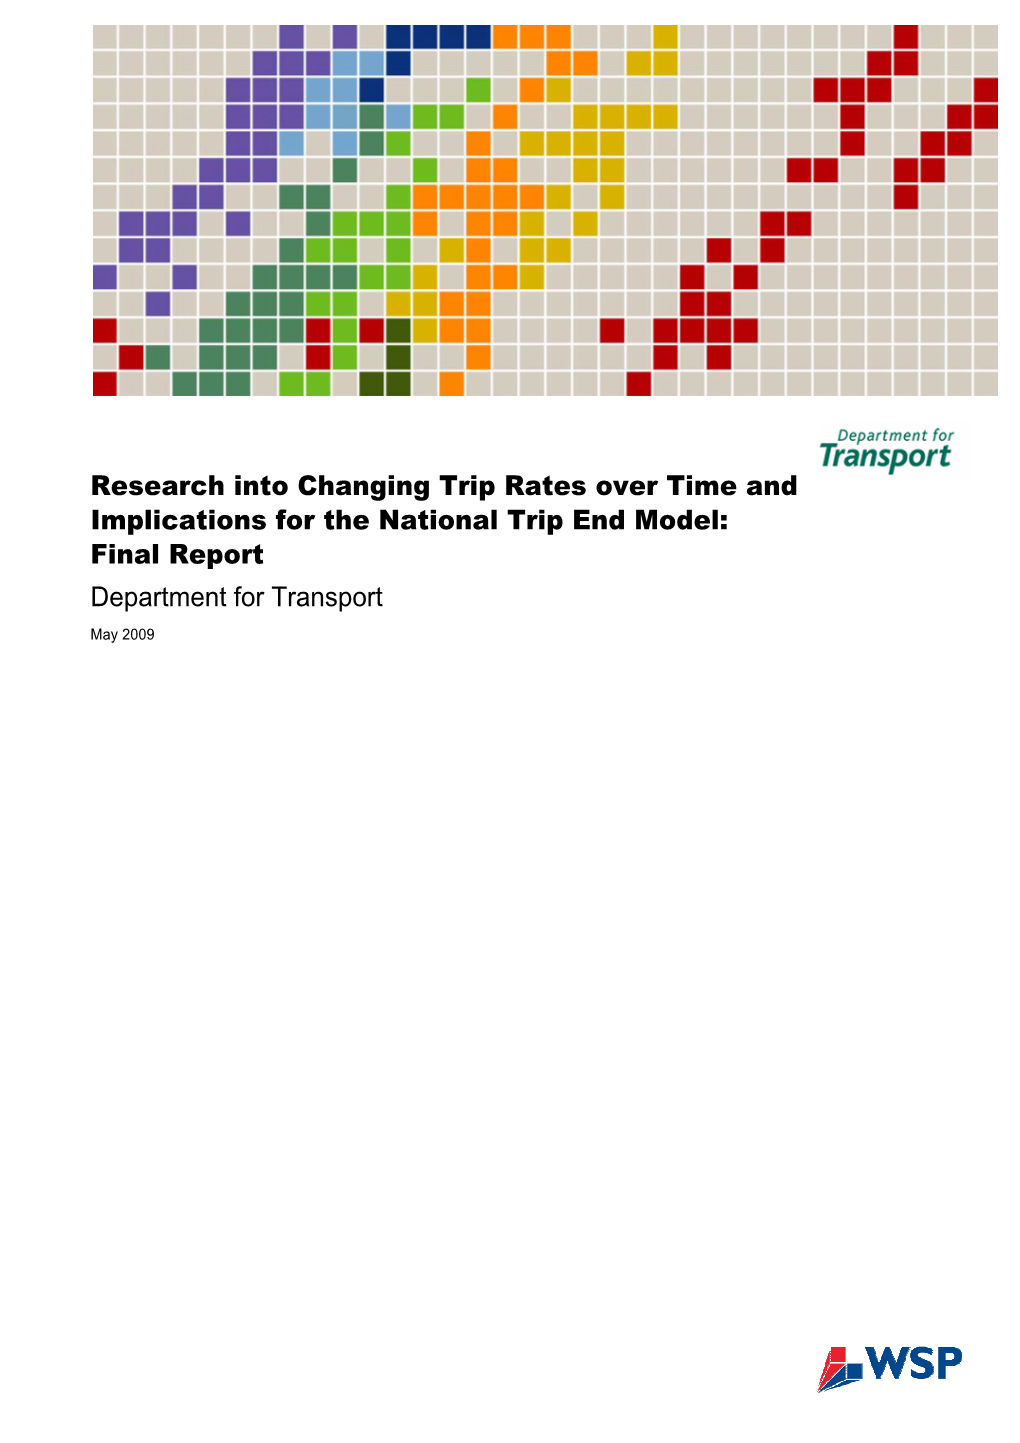 Research Into Changing Trip Rates Over Time and Implications for the National Trip End Model: Final Report Department for Transport